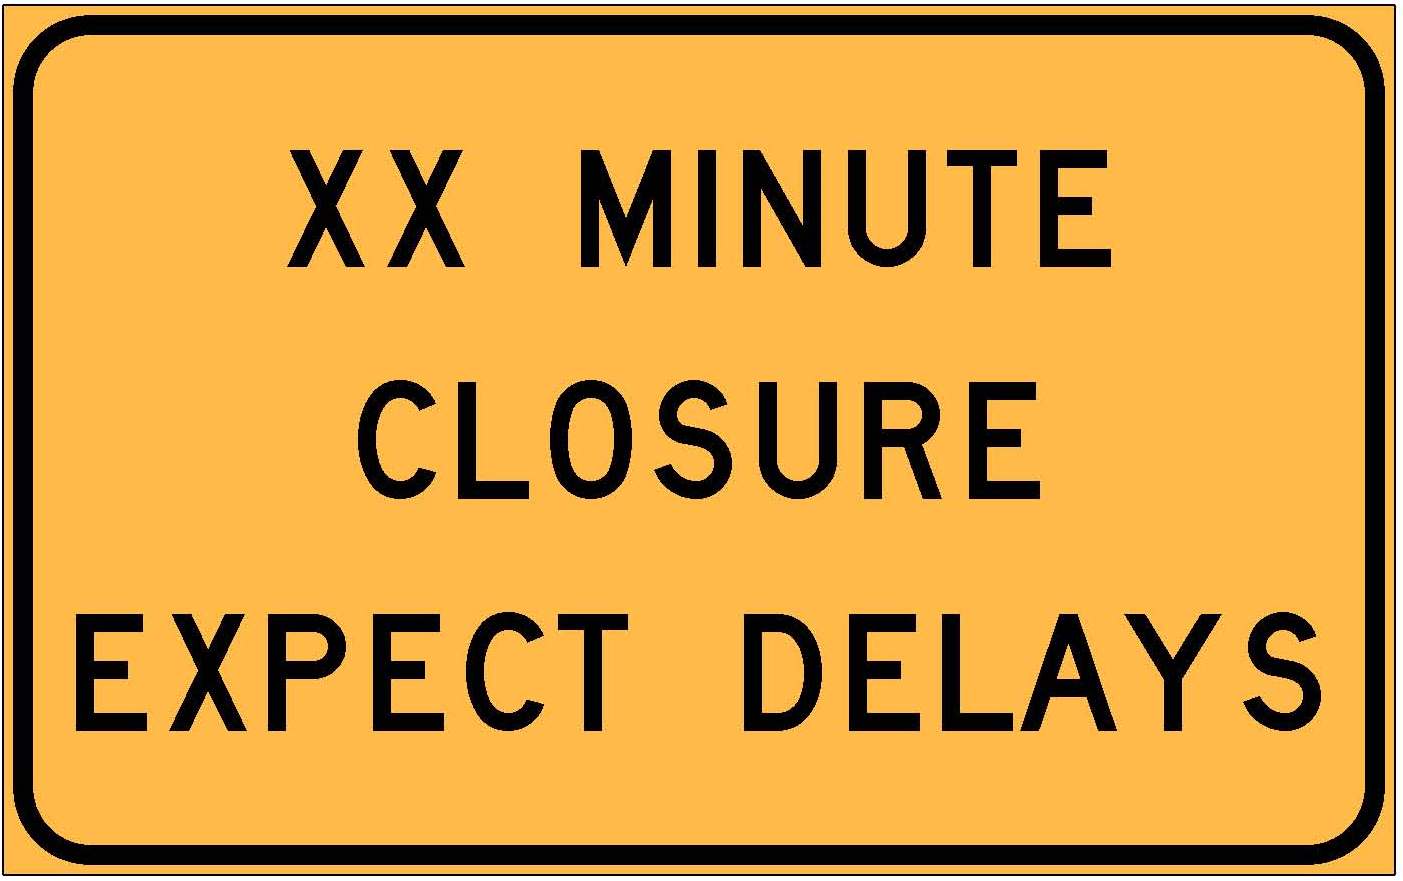 G20-55(X) XX Minute Closure Expect Delays.JPEG detail image